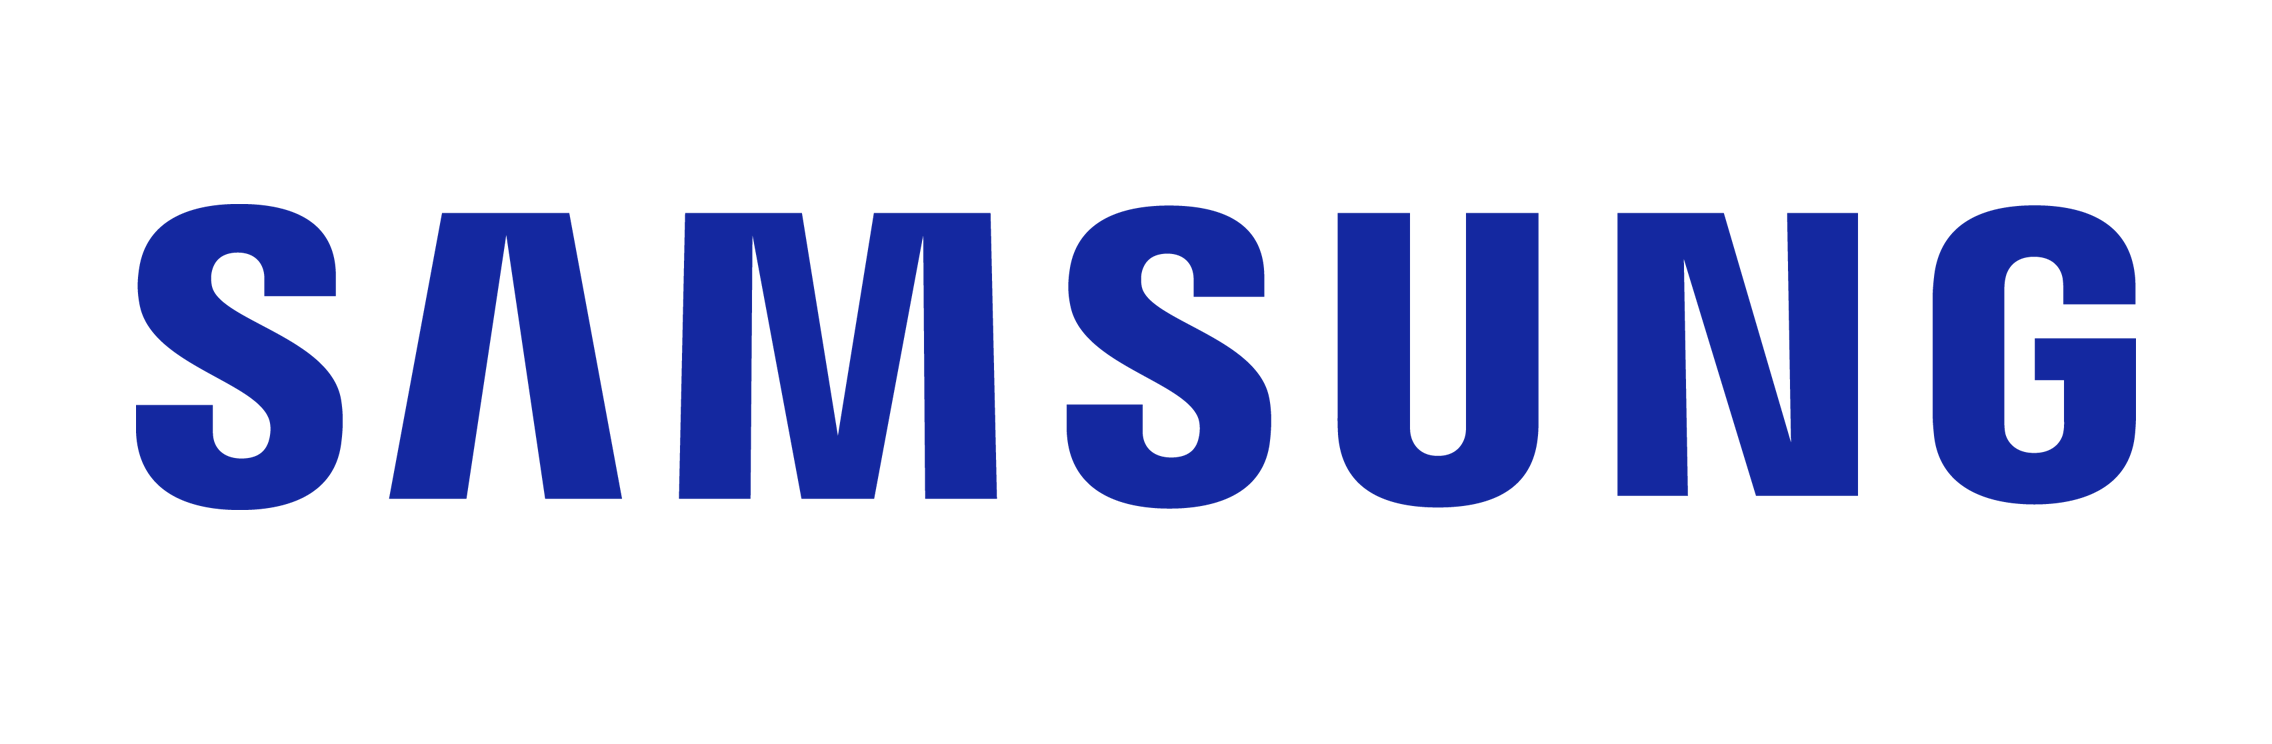 Samsung Mobile Logo, White Background, Blue text, Learn How to Repair Samsung Galaxy Mobile Phones with Khits Mobile Repairing Institute, udaipur